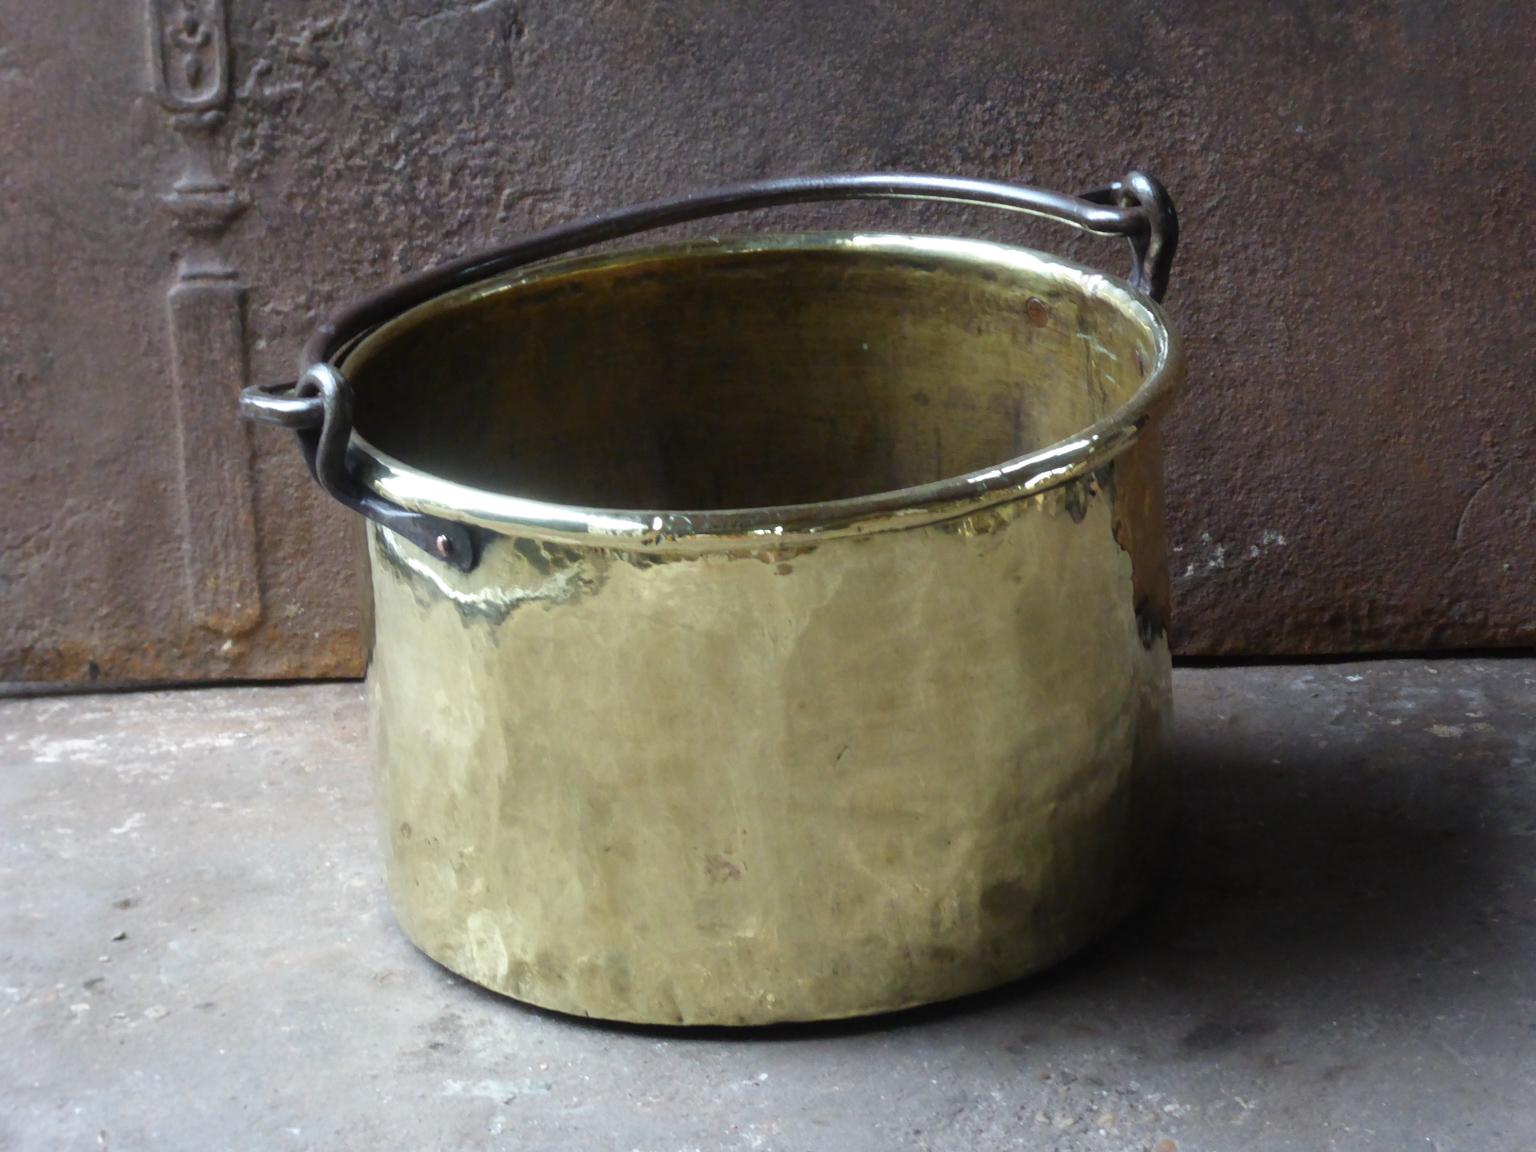 18th century Dutch log bin firewood bucket made of polished brass and wrought iron. Dutch brass kettle, also called 'aker'. Used to draw water from the well and cook over an open fire.